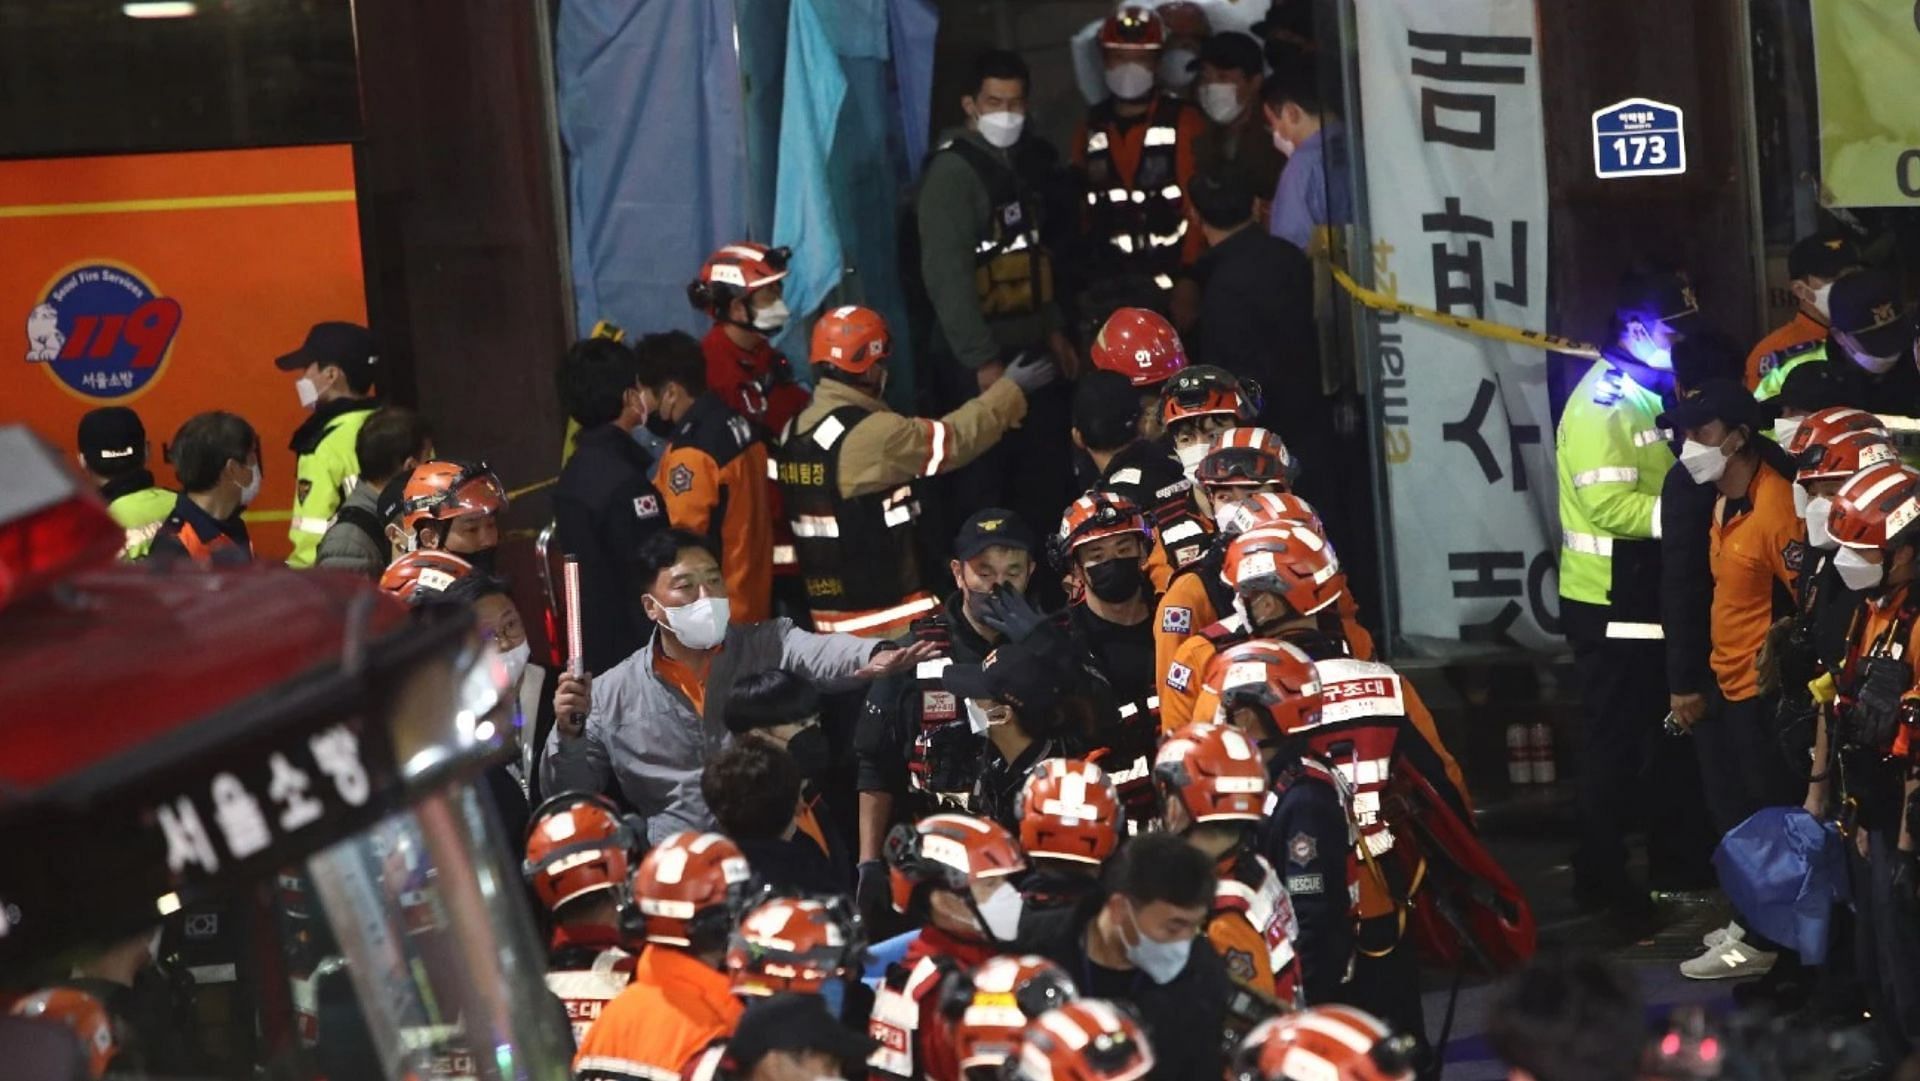 Itaewon saw over 150 people dead because of a stampede. (Image via Chung Sung-Jun/Getty Images)